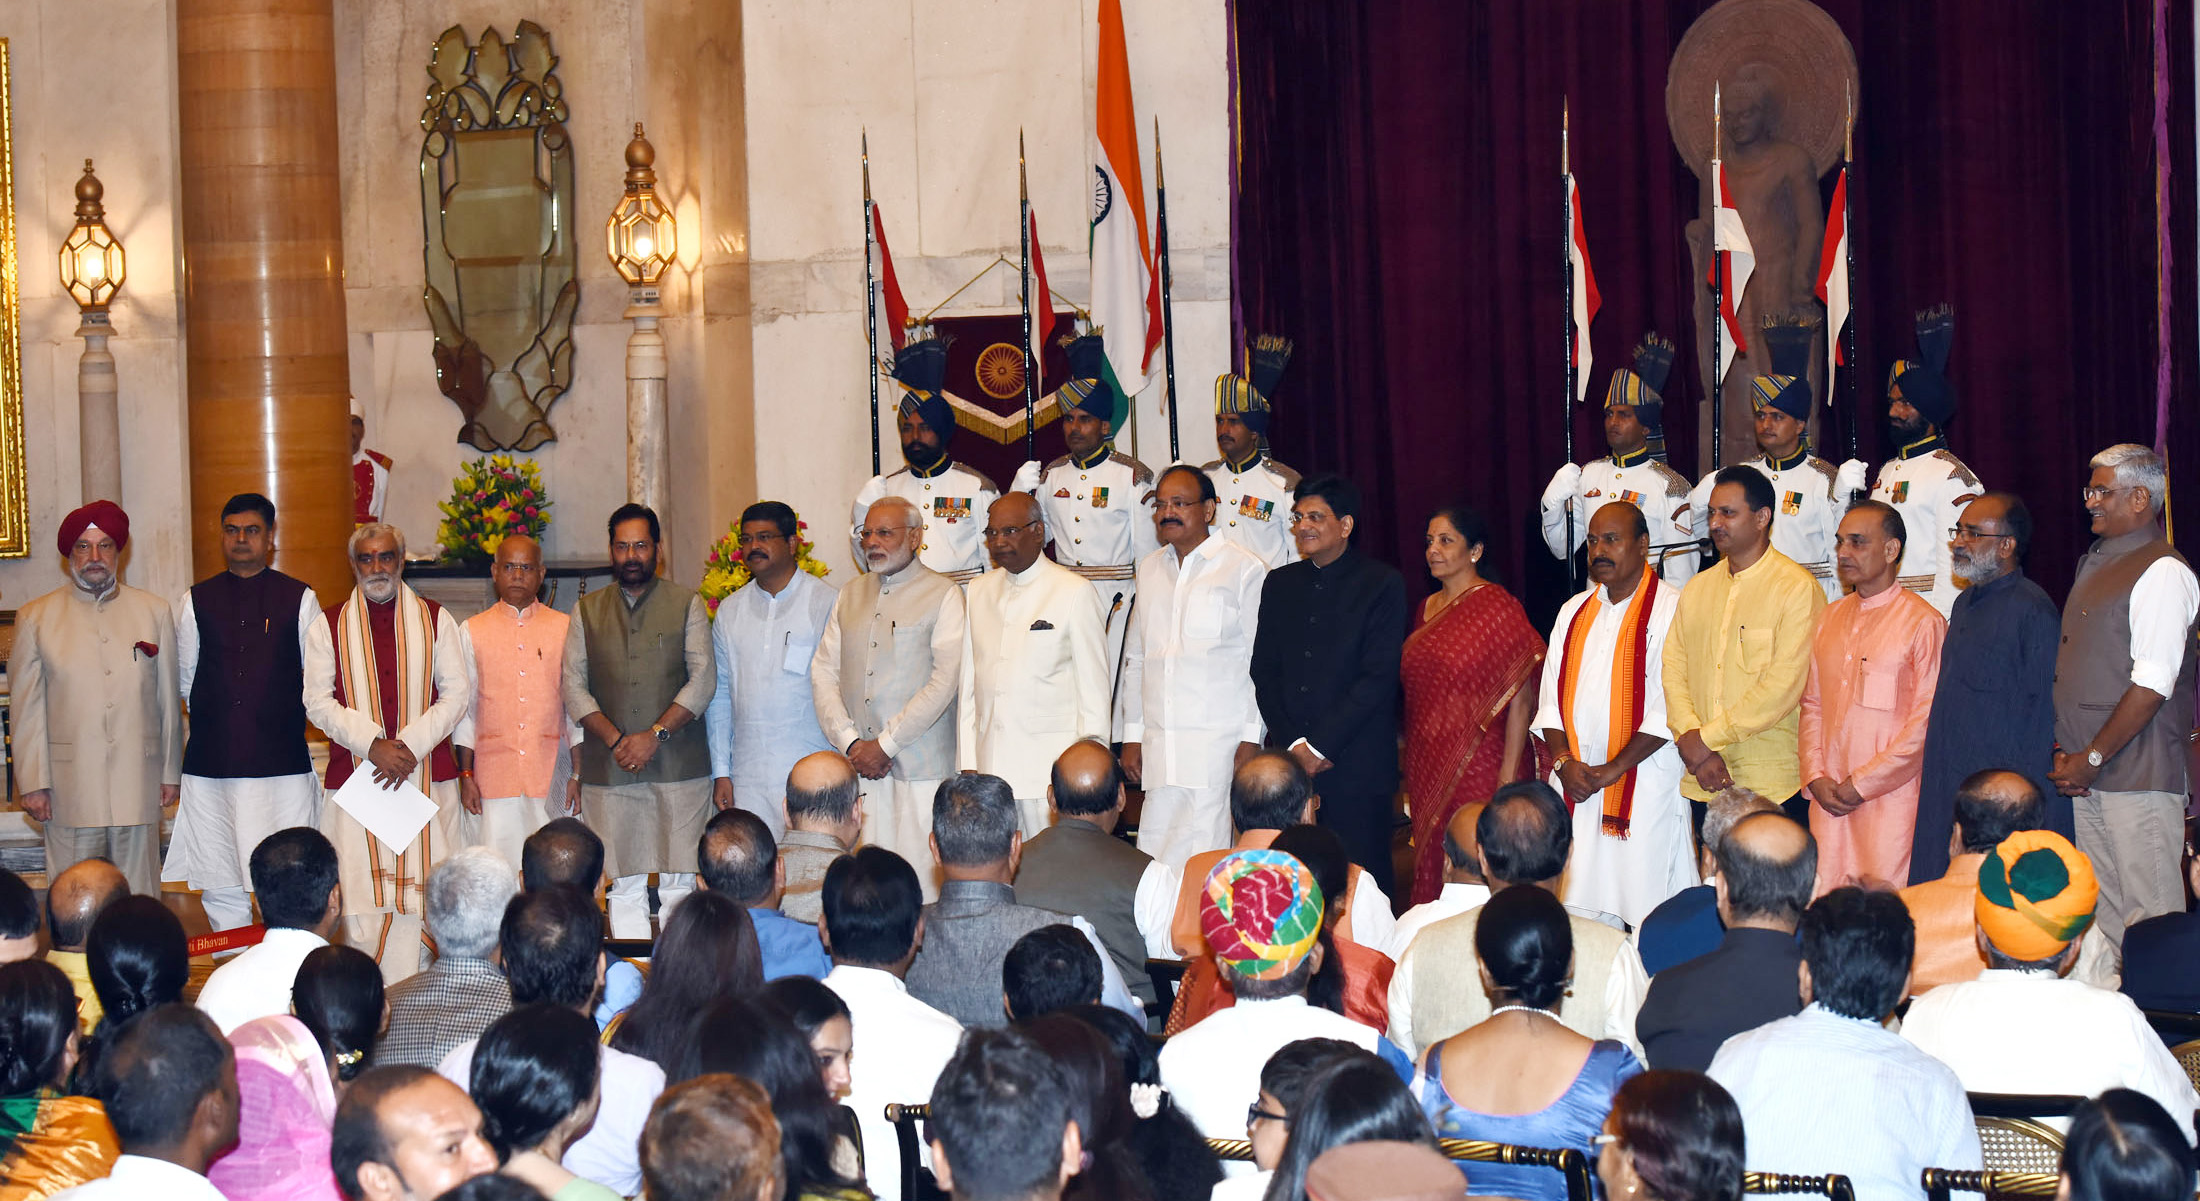 The President, Shri Ram Nath Kovind, the Vice President, Shri M. Venkaiah Naidu and the Prime Minister, Shri Narendra Modi with the newly inducted Ministers after a Swearing-in Ceremony, at Rashtrapati Bhavan, in New Delhi on September 03, 2017.